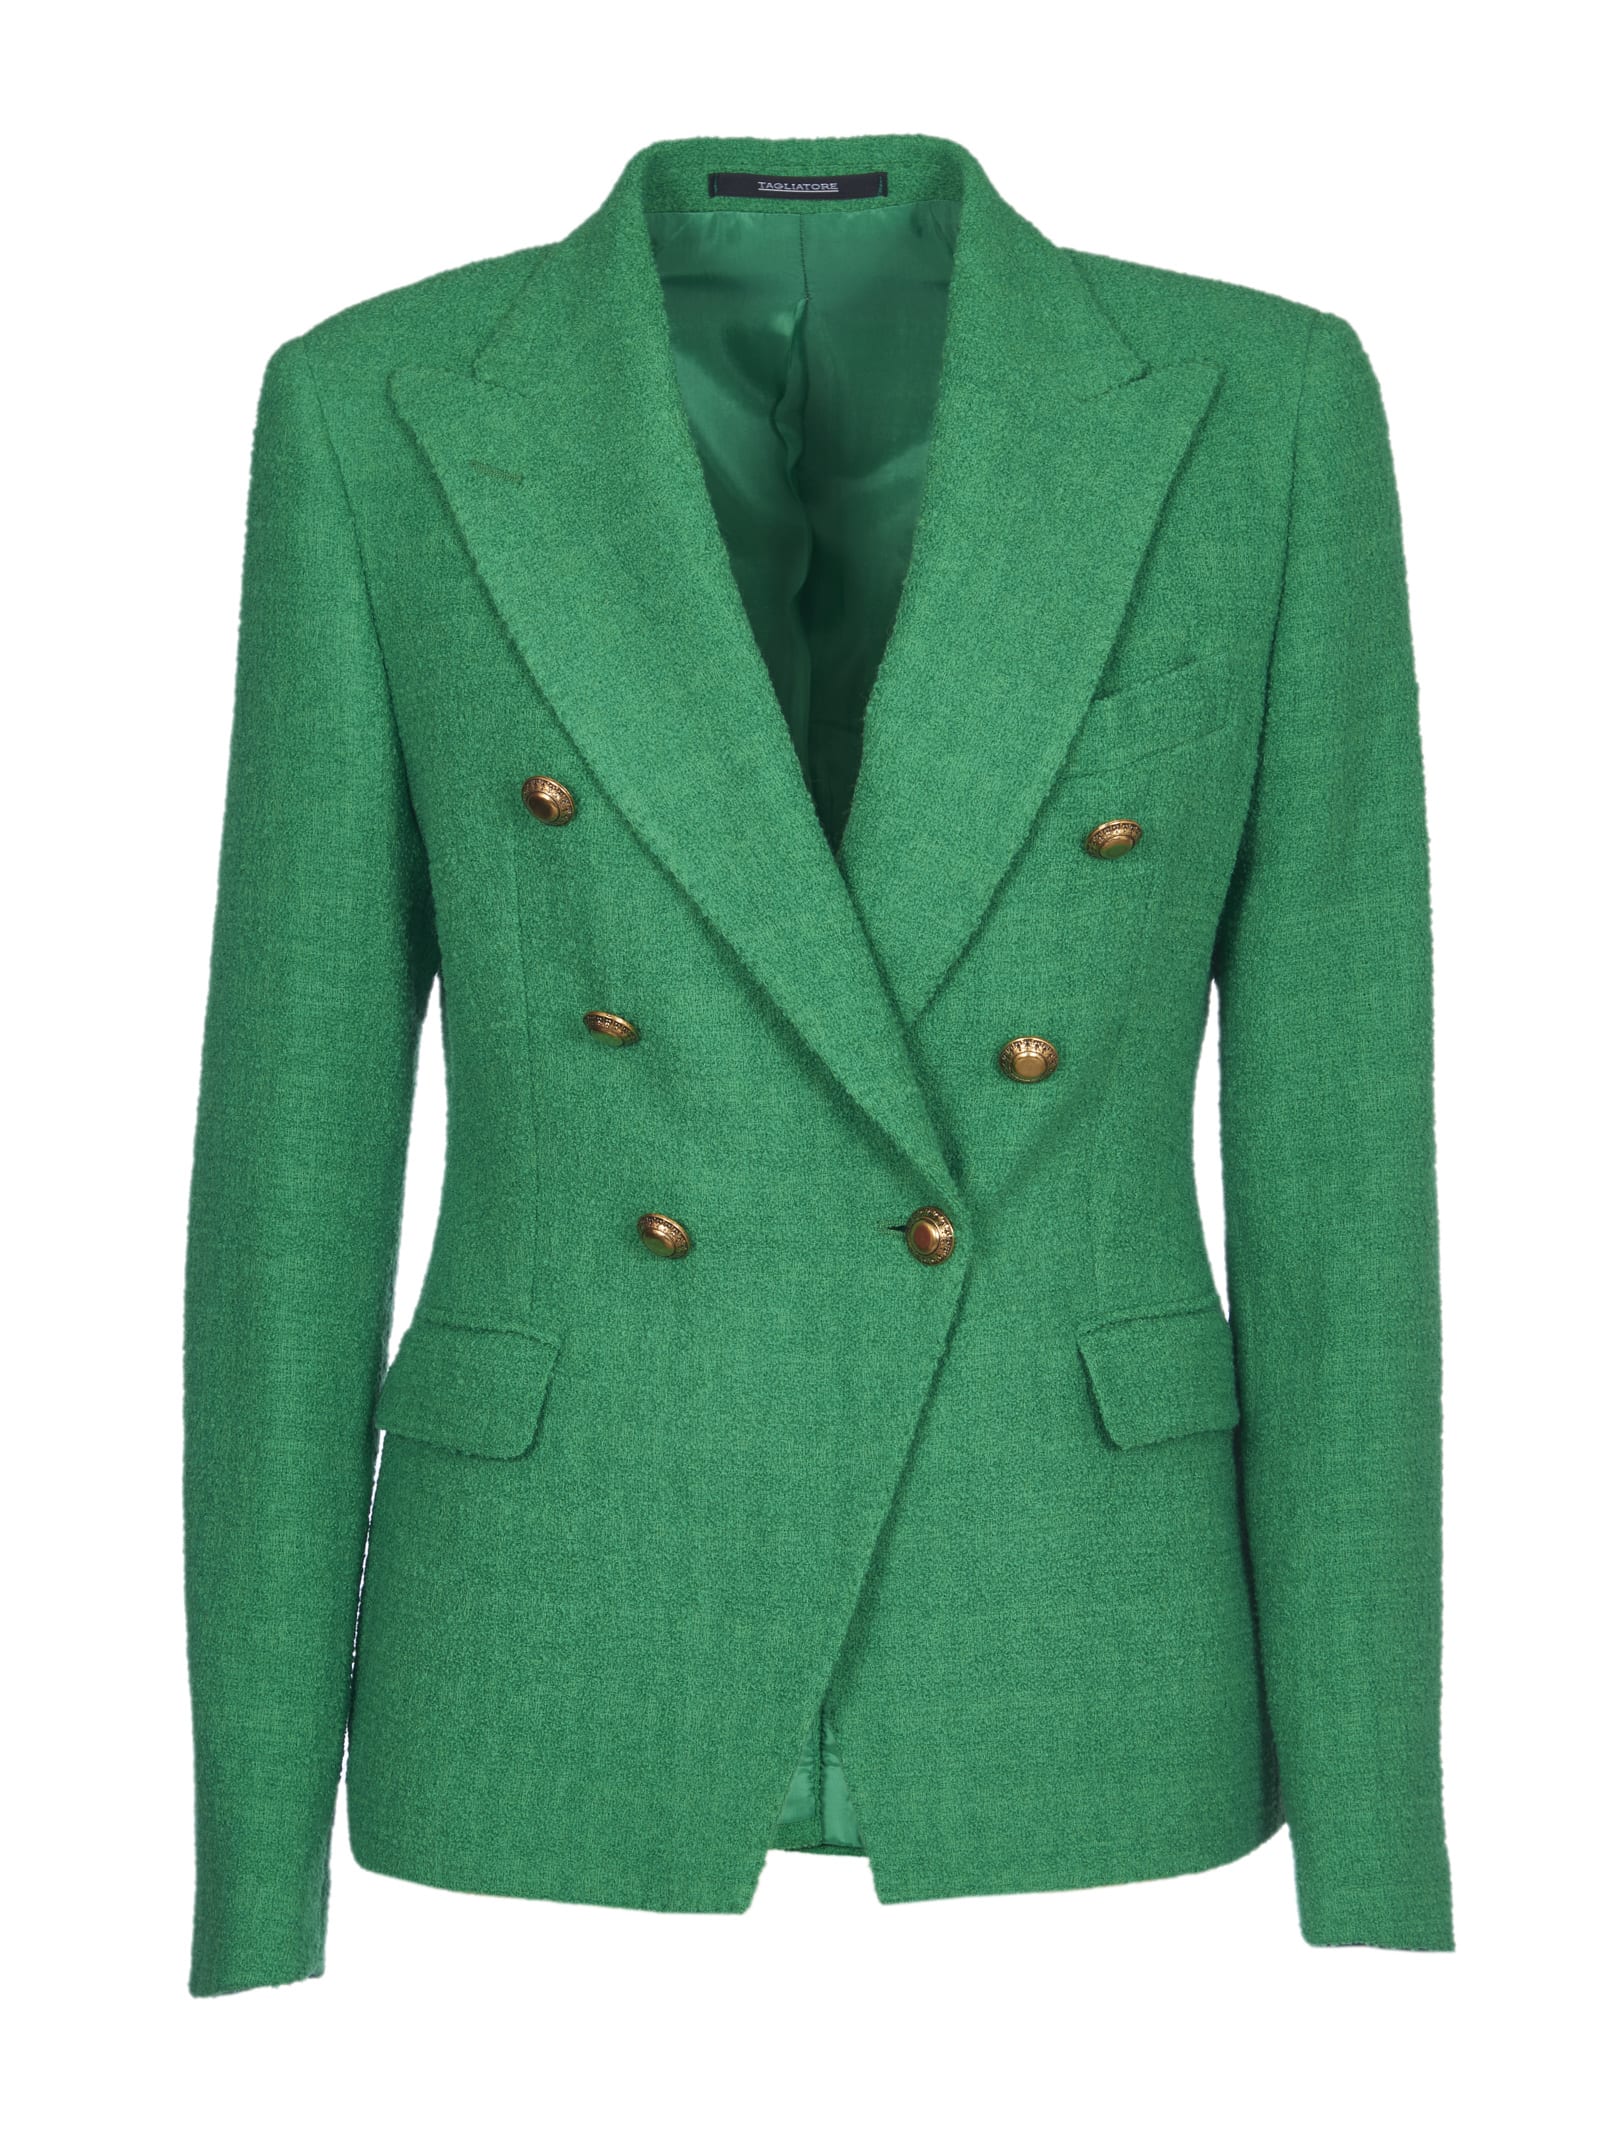 Tagliatore 0205 Green Double-breasted Jacket